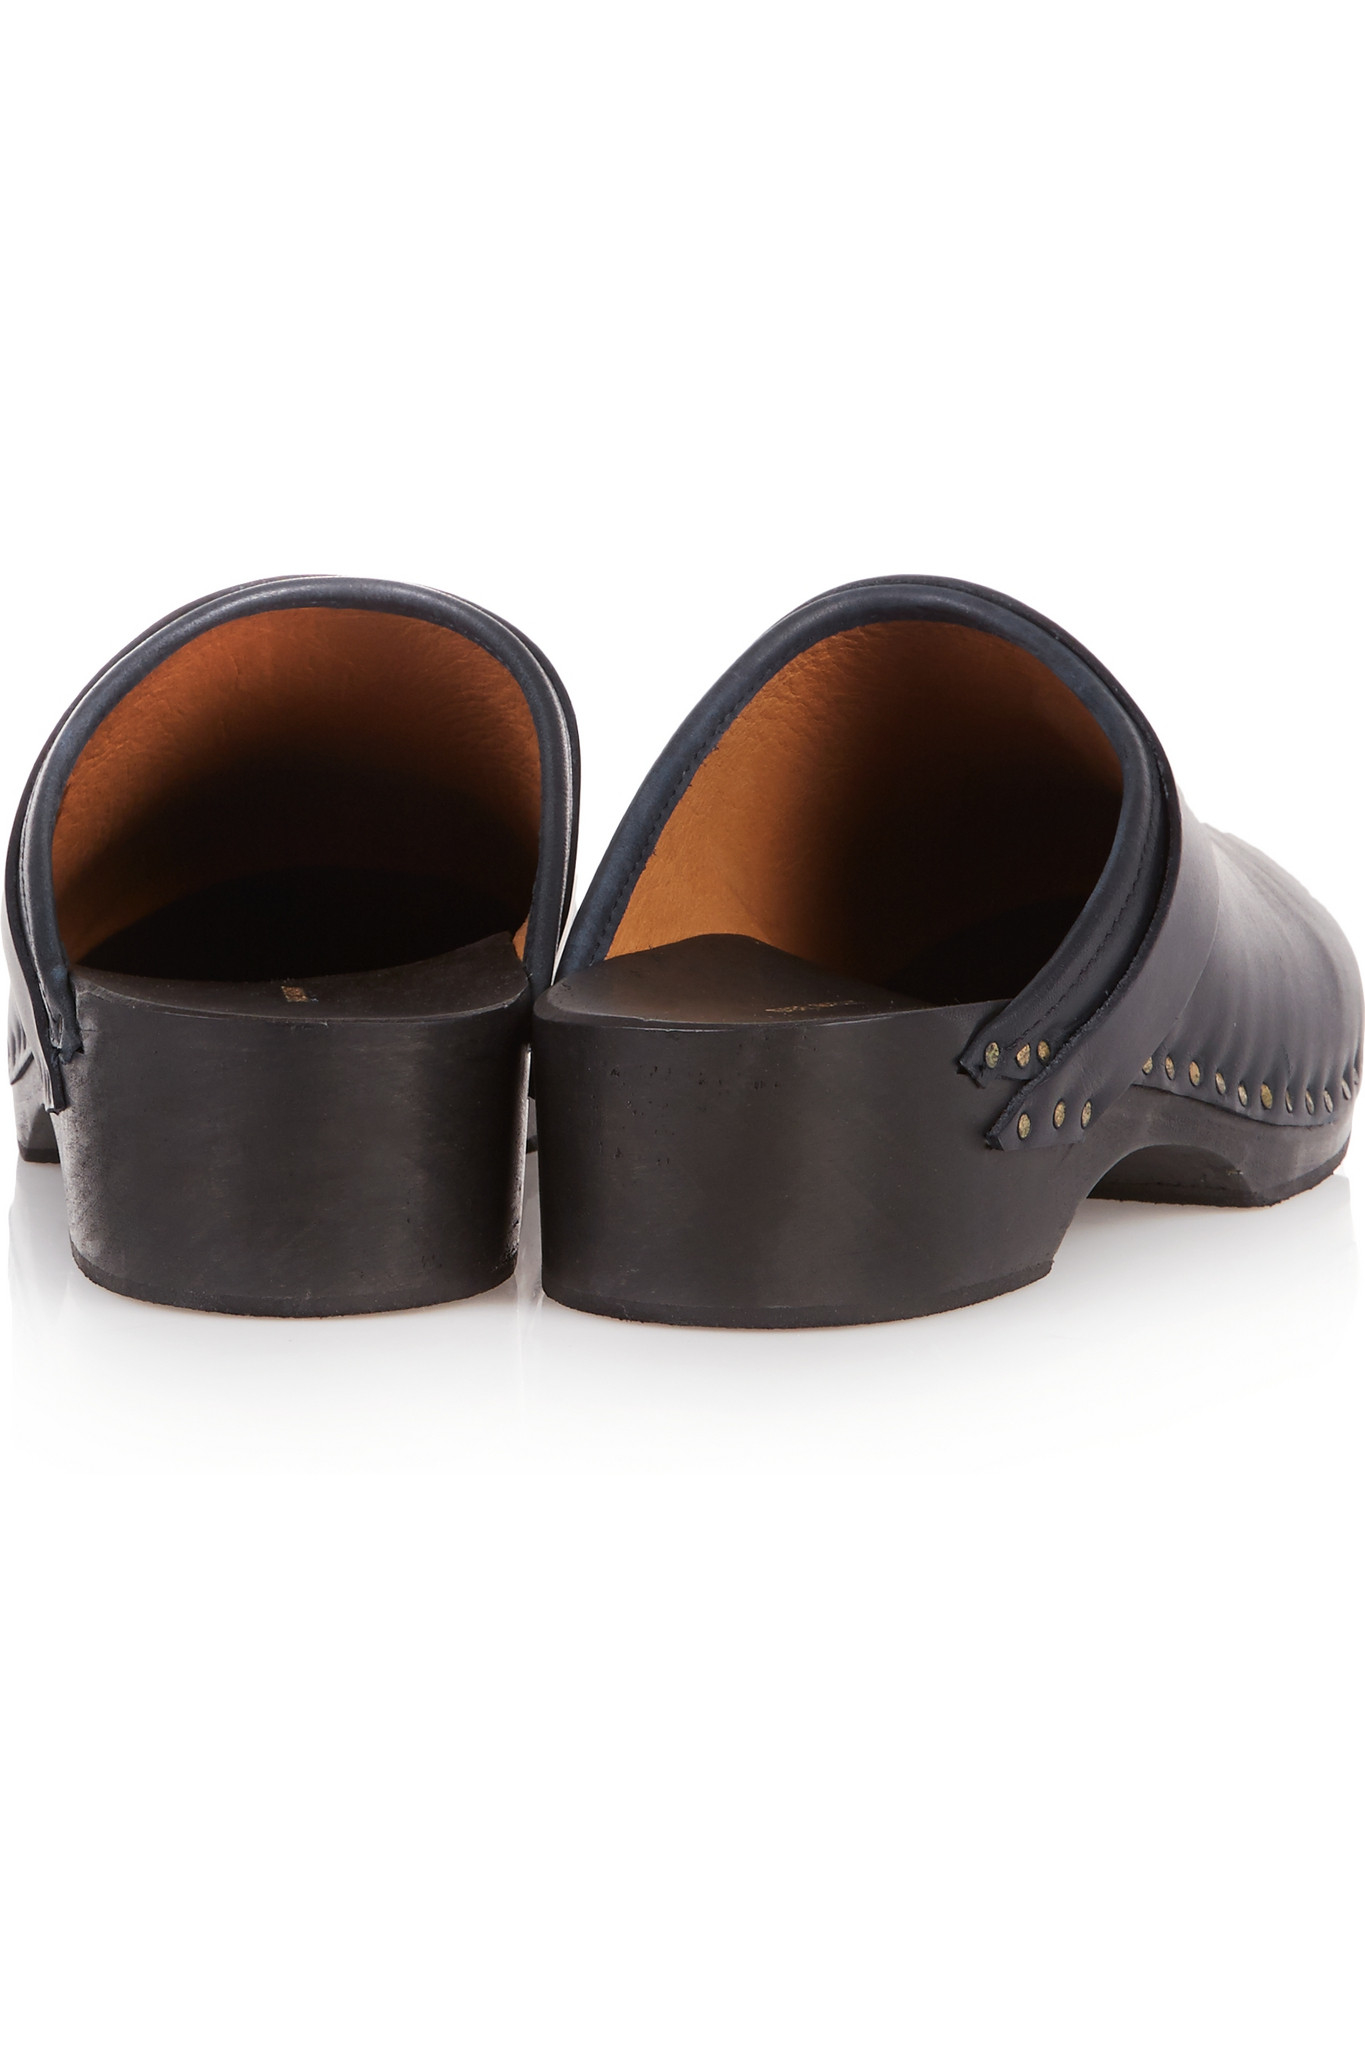 Isabel Marant Tavia Studded Leather Clogs in Midnight Blue (Blue) - Lyst